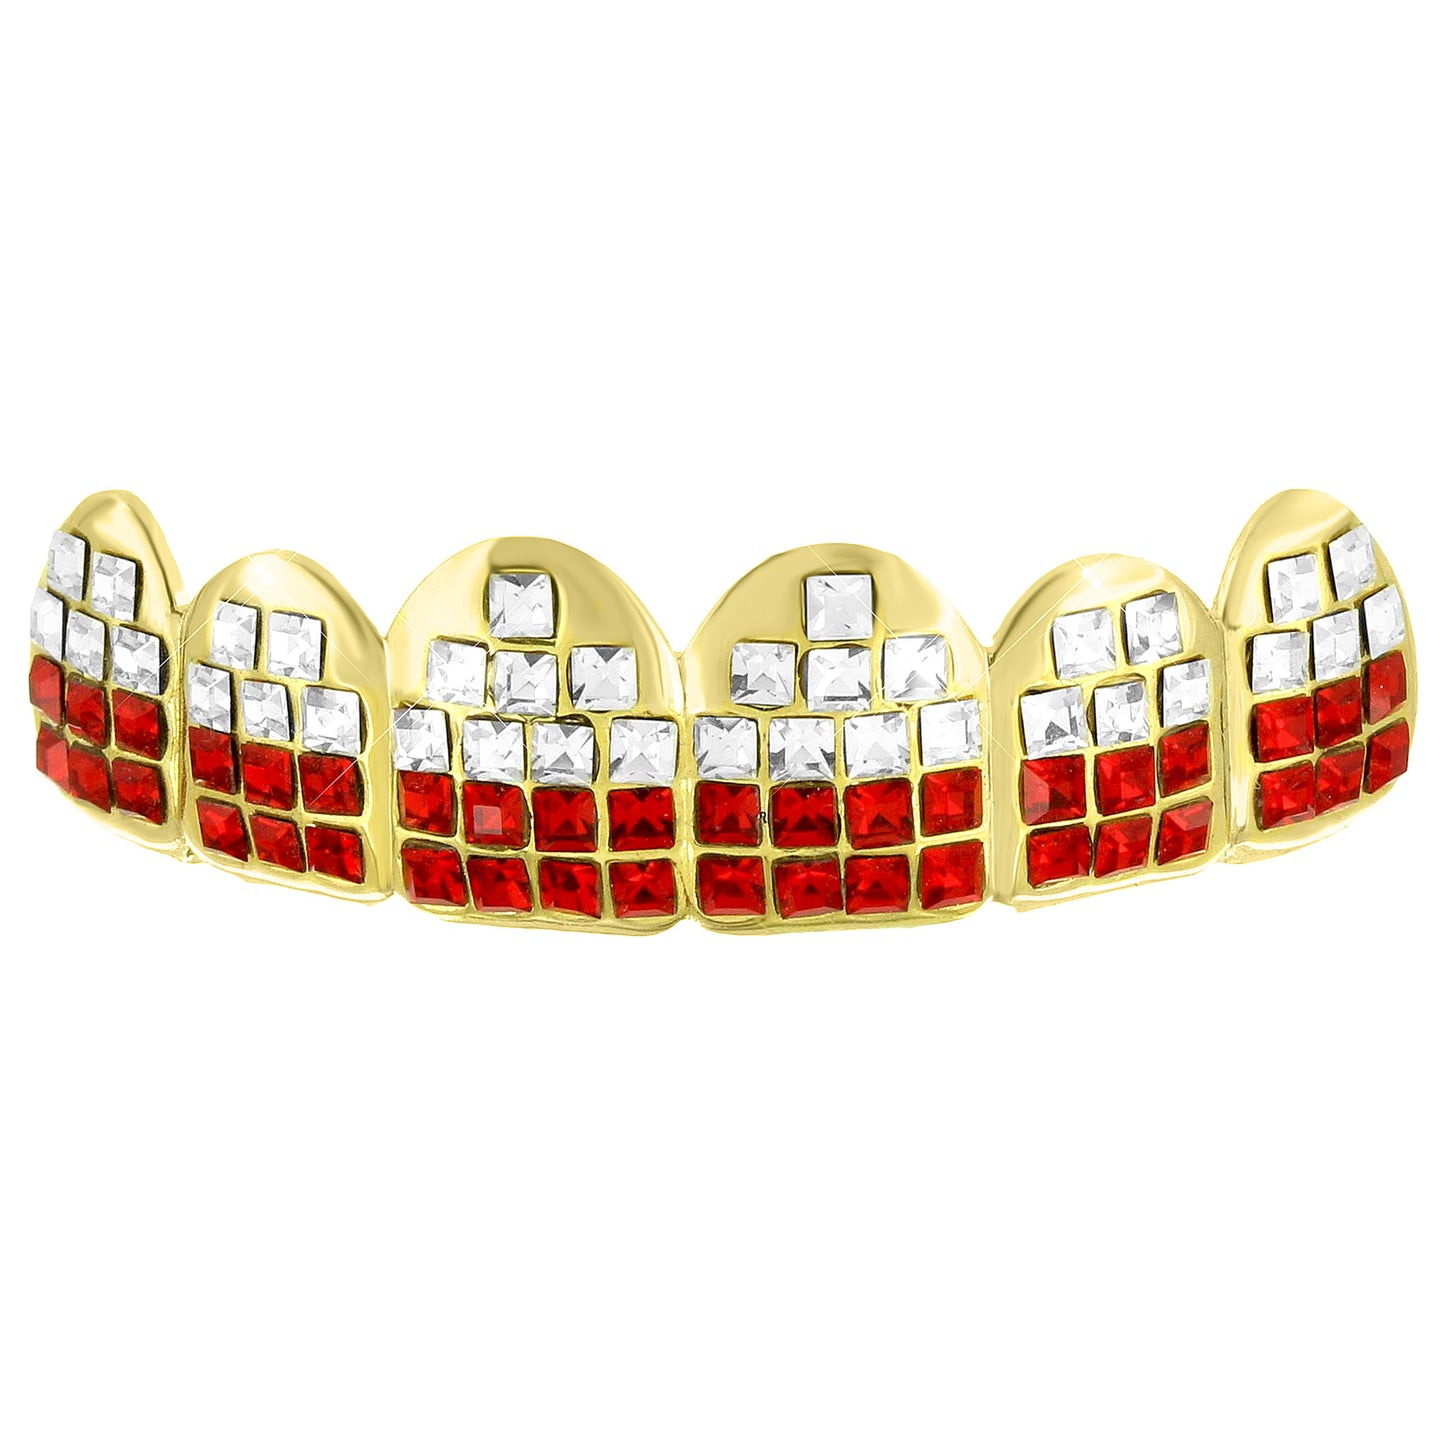 Red White Lab Diamond Top Teeth Mouth Grillz